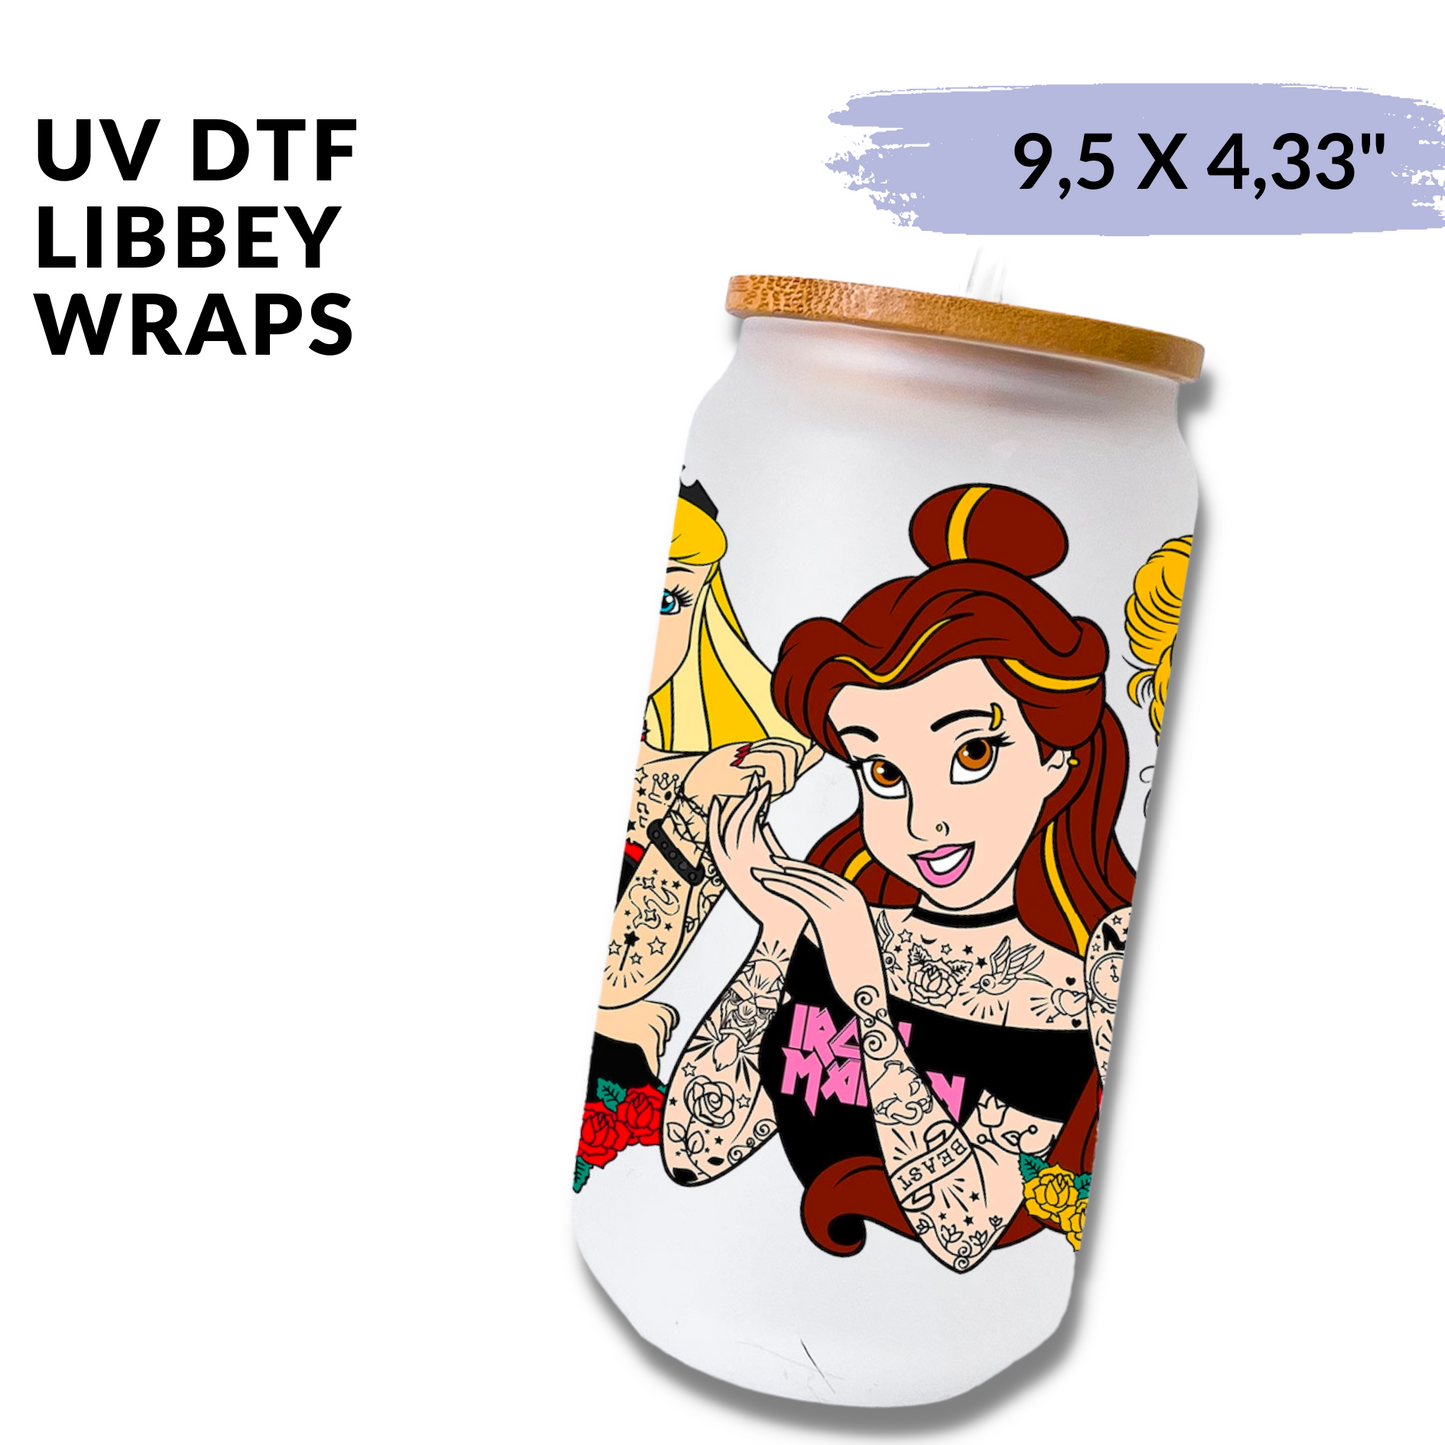 UV DTF - Princess Rock and Roll Libbey cup Wrap